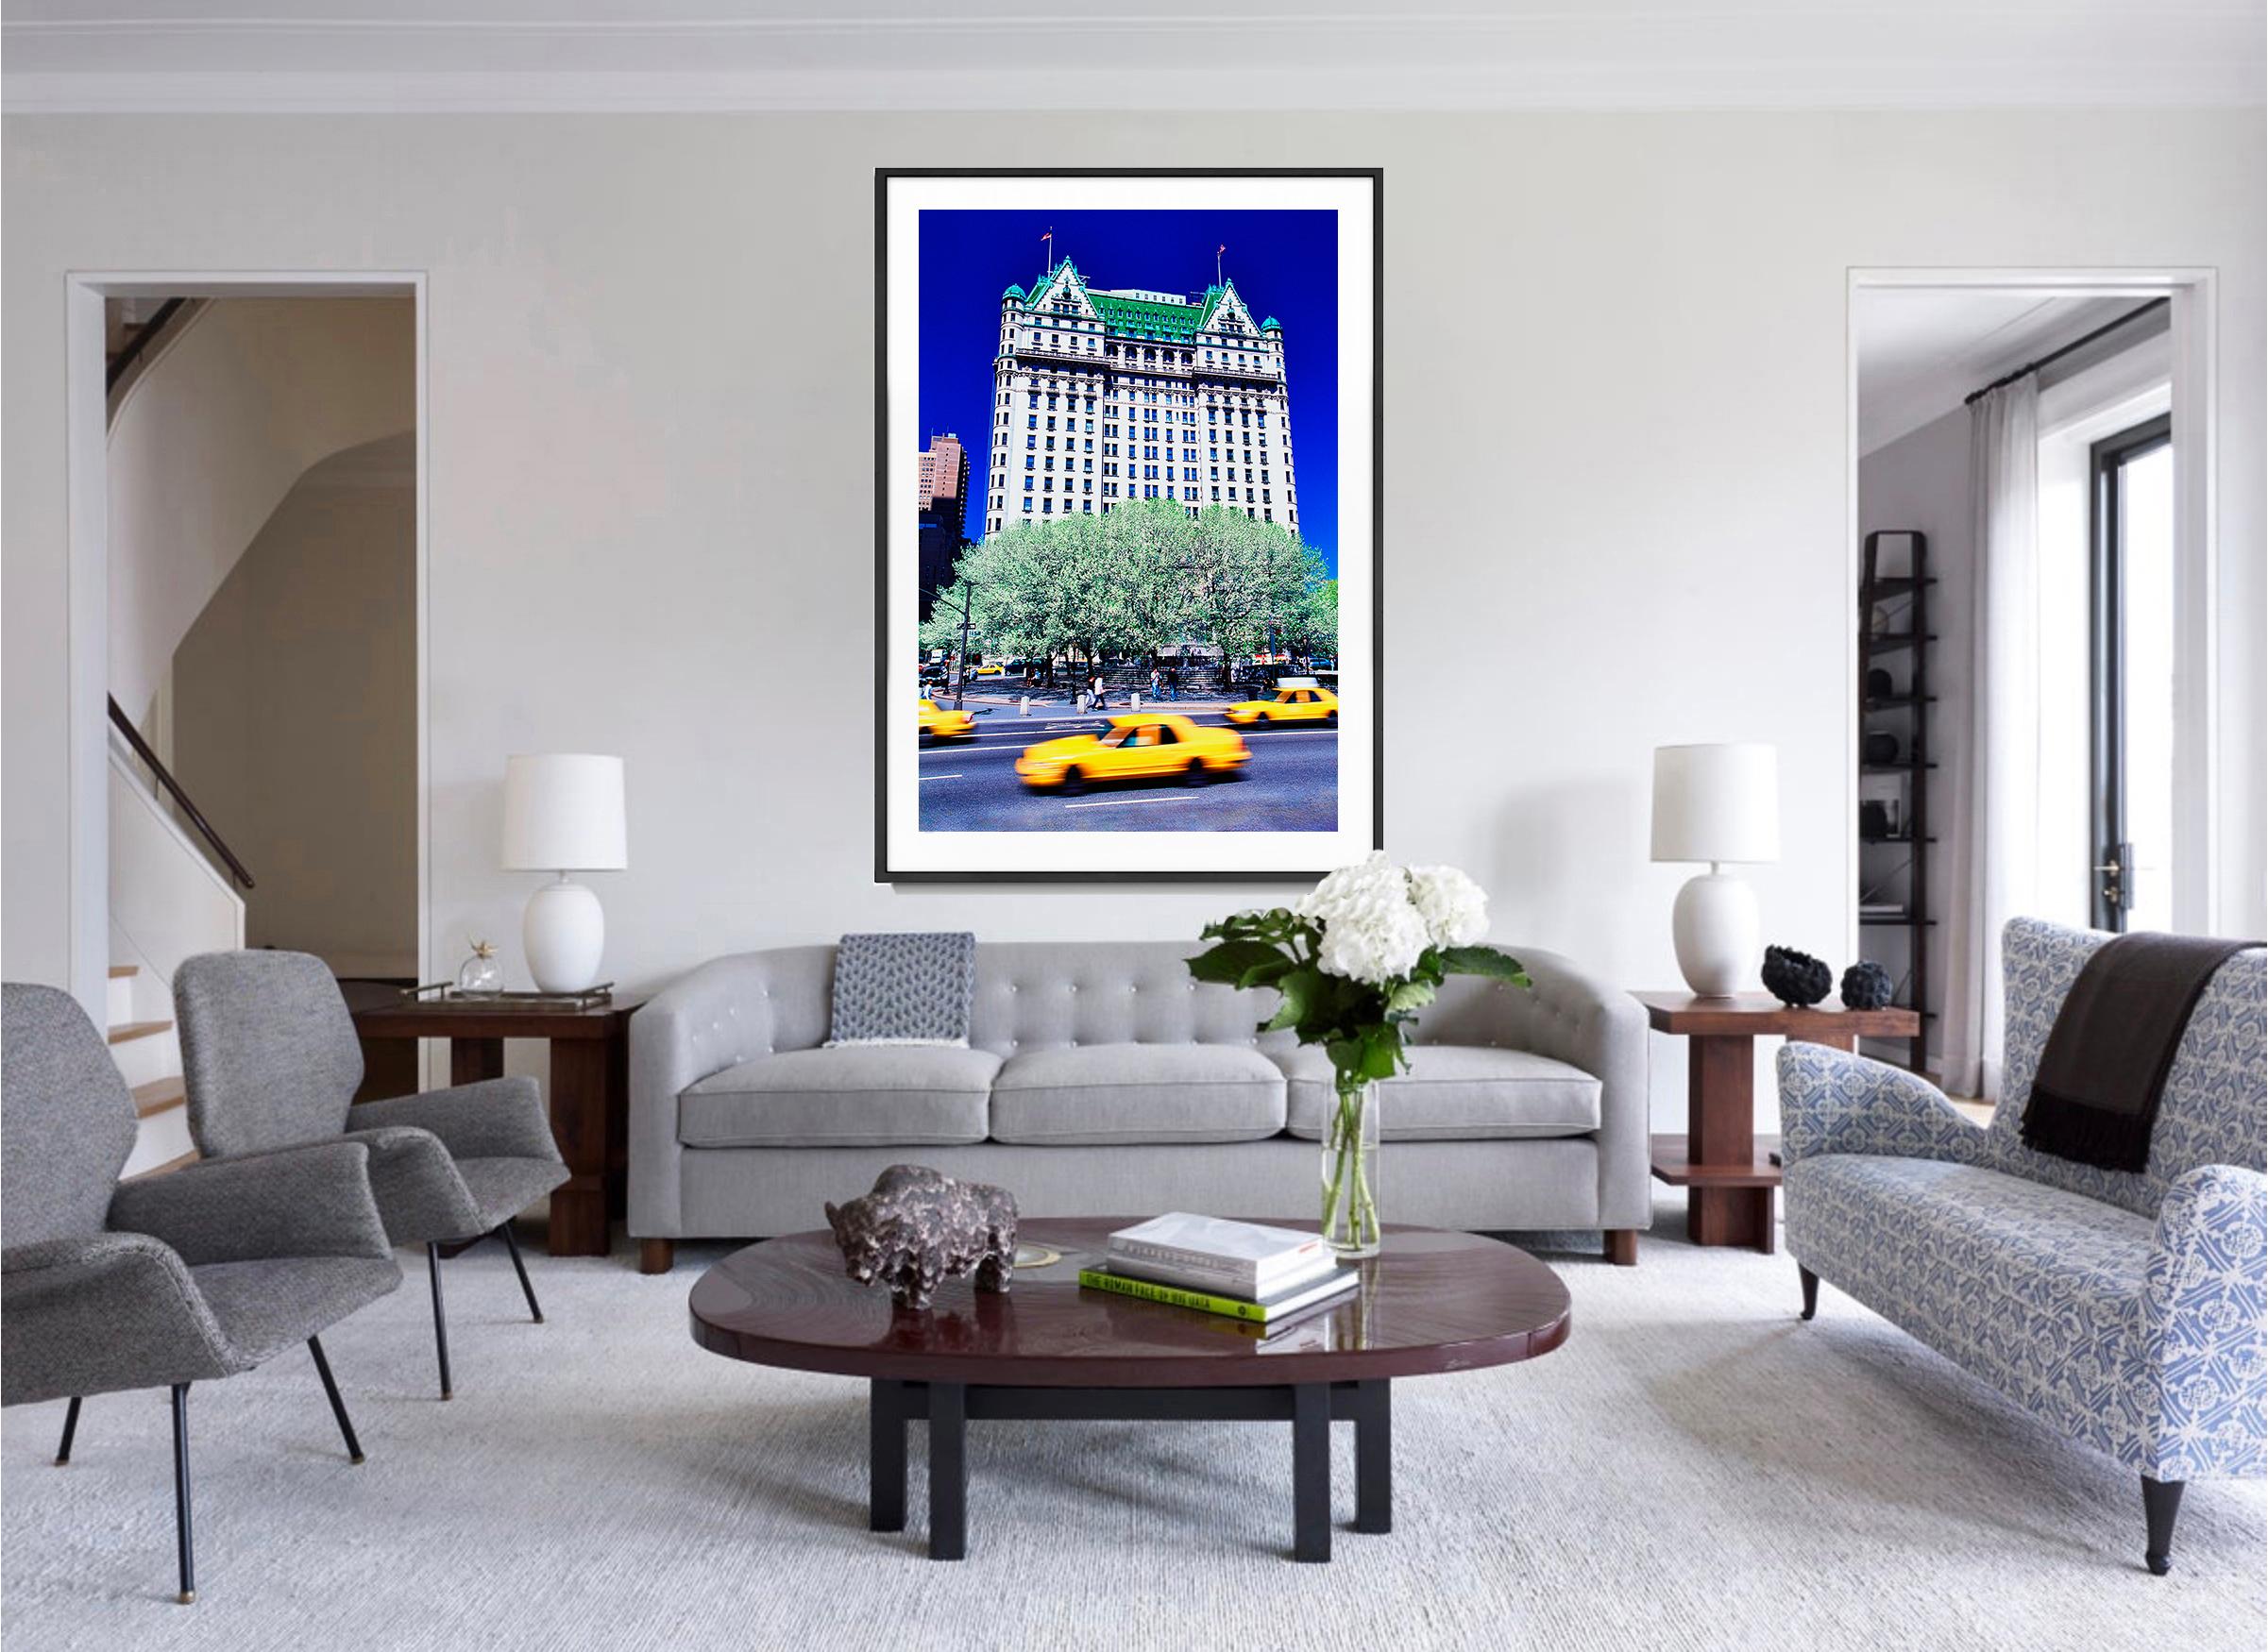 Plaza Hotel with Yellow Taxis,  Blue Sky New York City in Spring - Contemporary Photograph by Mitchell Funk